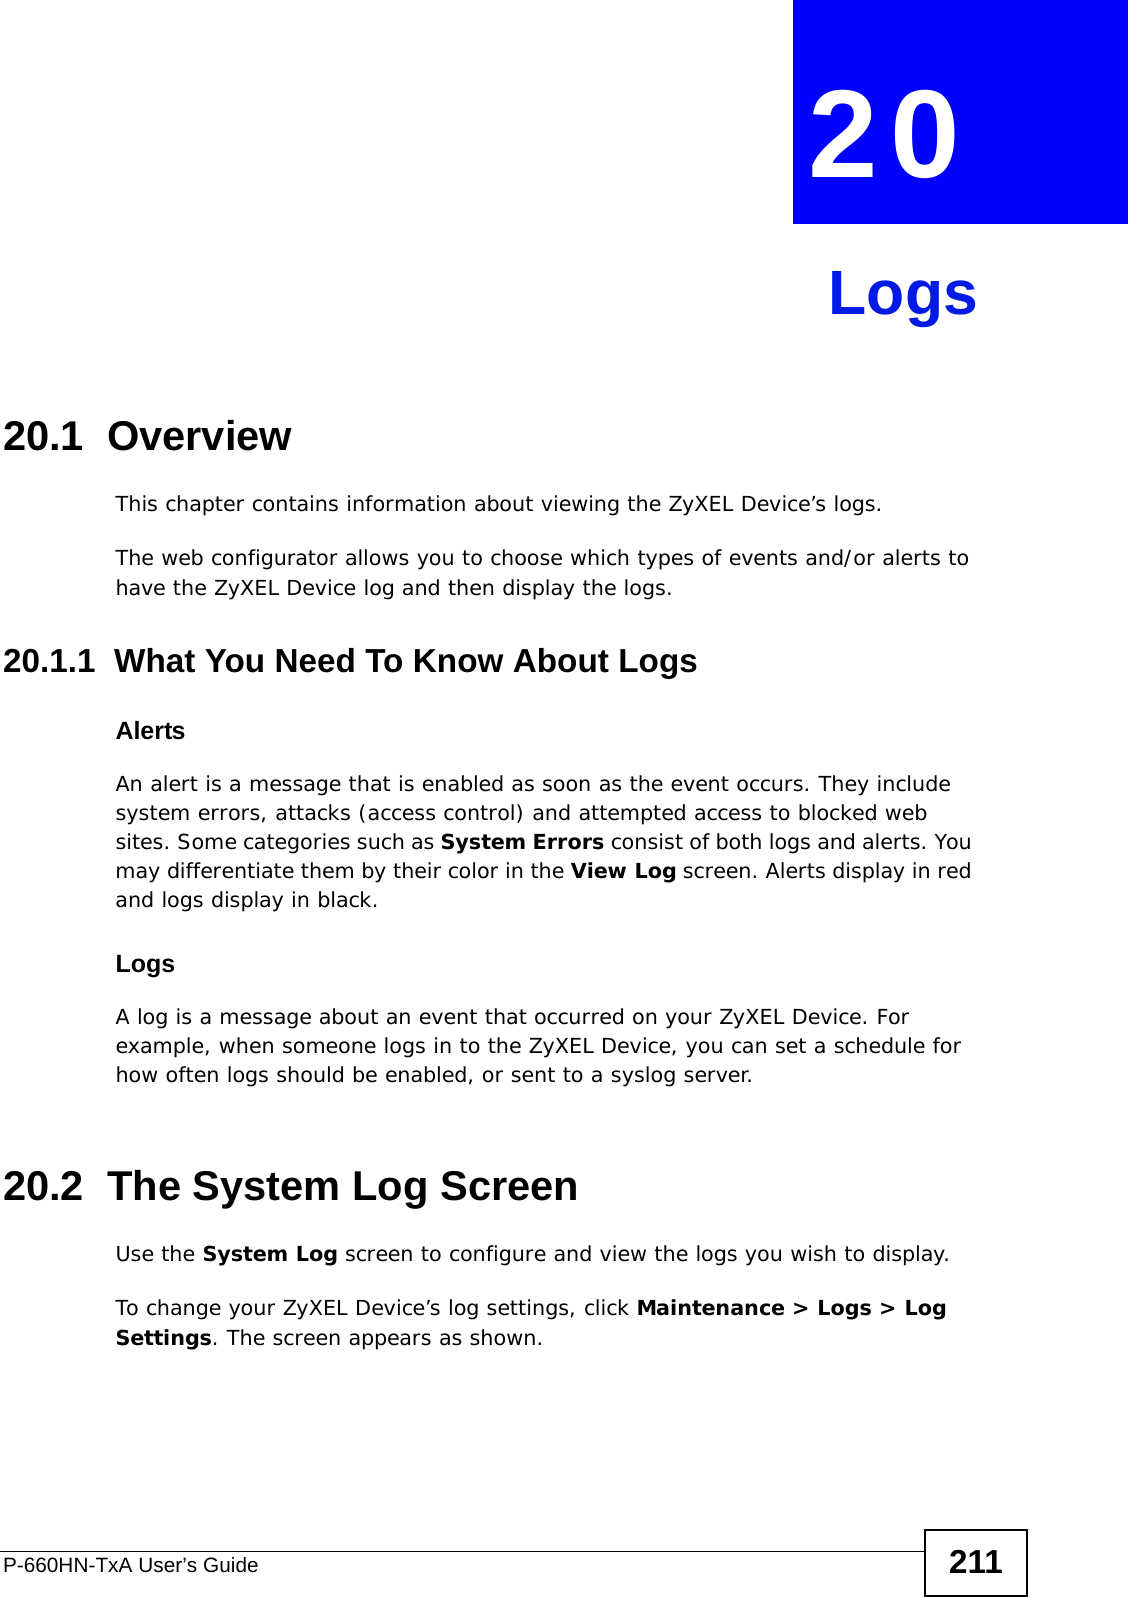 P-660HN-TxA User’s Guide 211CHAPTER  20 Logs20.1  OverviewThis chapter contains information about viewing the ZyXEL Device’s logs.The web configurator allows you to choose which types of events and/or alerts to have the ZyXEL Device log and then display the logs. 20.1.1  What You Need To Know About LogsAlertsAn alert is a message that is enabled as soon as the event occurs. They include system errors, attacks (access control) and attempted access to blocked web sites. Some categories such as System Errors consist of both logs and alerts. You may differentiate them by their color in the View Log screen. Alerts display in red and logs display in black.LogsA log is a message about an event that occurred on your ZyXEL Device. For example, when someone logs in to the ZyXEL Device, you can set a schedule for how often logs should be enabled, or sent to a syslog server.20.2  The System Log ScreenUse the System Log screen to configure and view the logs you wish to display.To change your ZyXEL Device’s log settings, click Maintenance &gt; Logs &gt; Log Settings. The screen appears as shown.